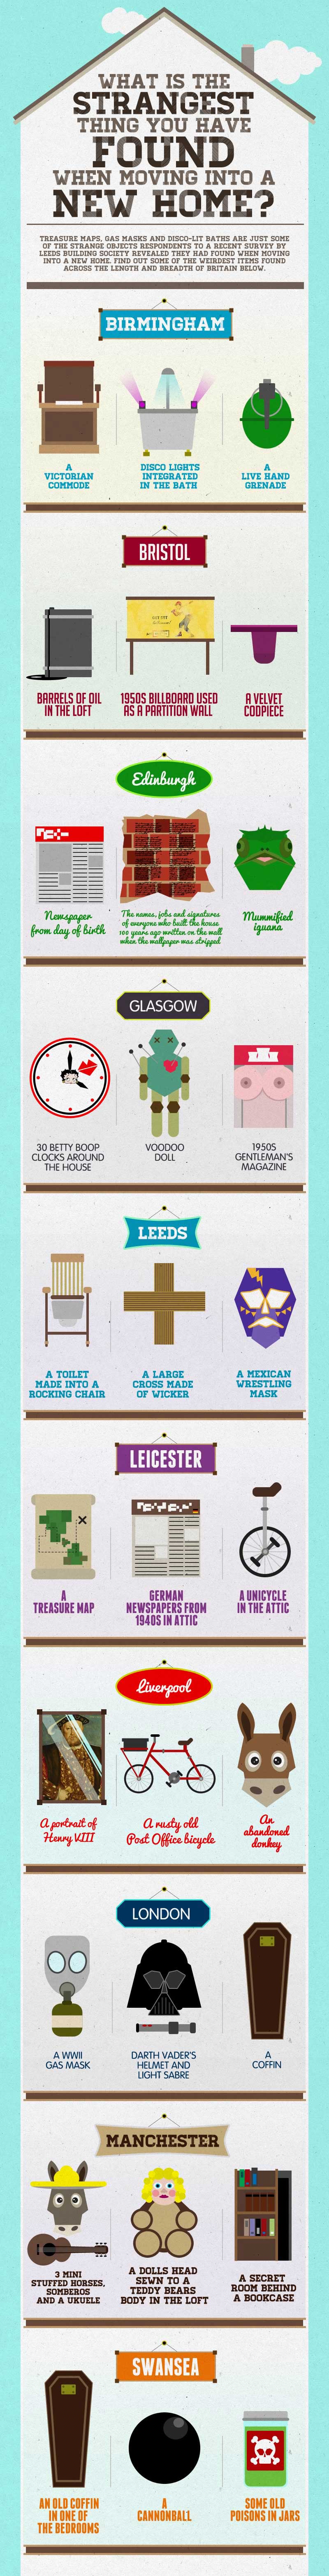 Strangest Things Found in a New Home Infographic